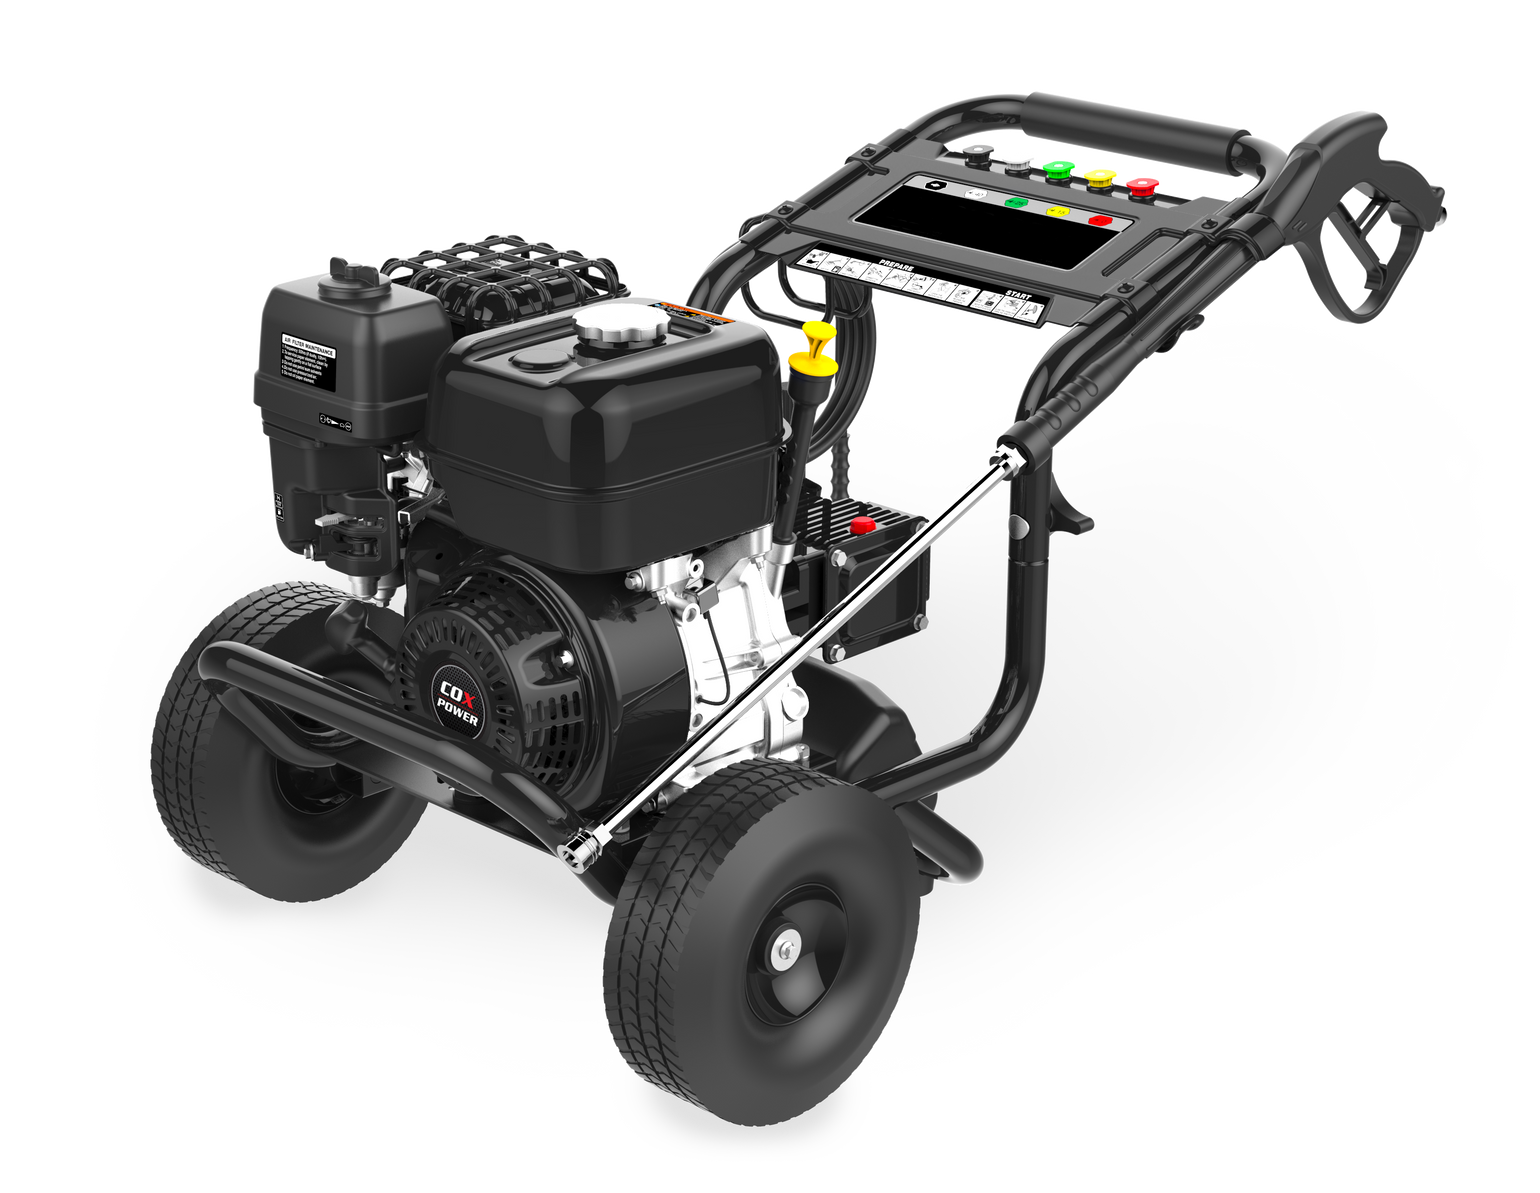 COX Power Commercial Series Pressure Washers, available in 3600psi to 43000psi